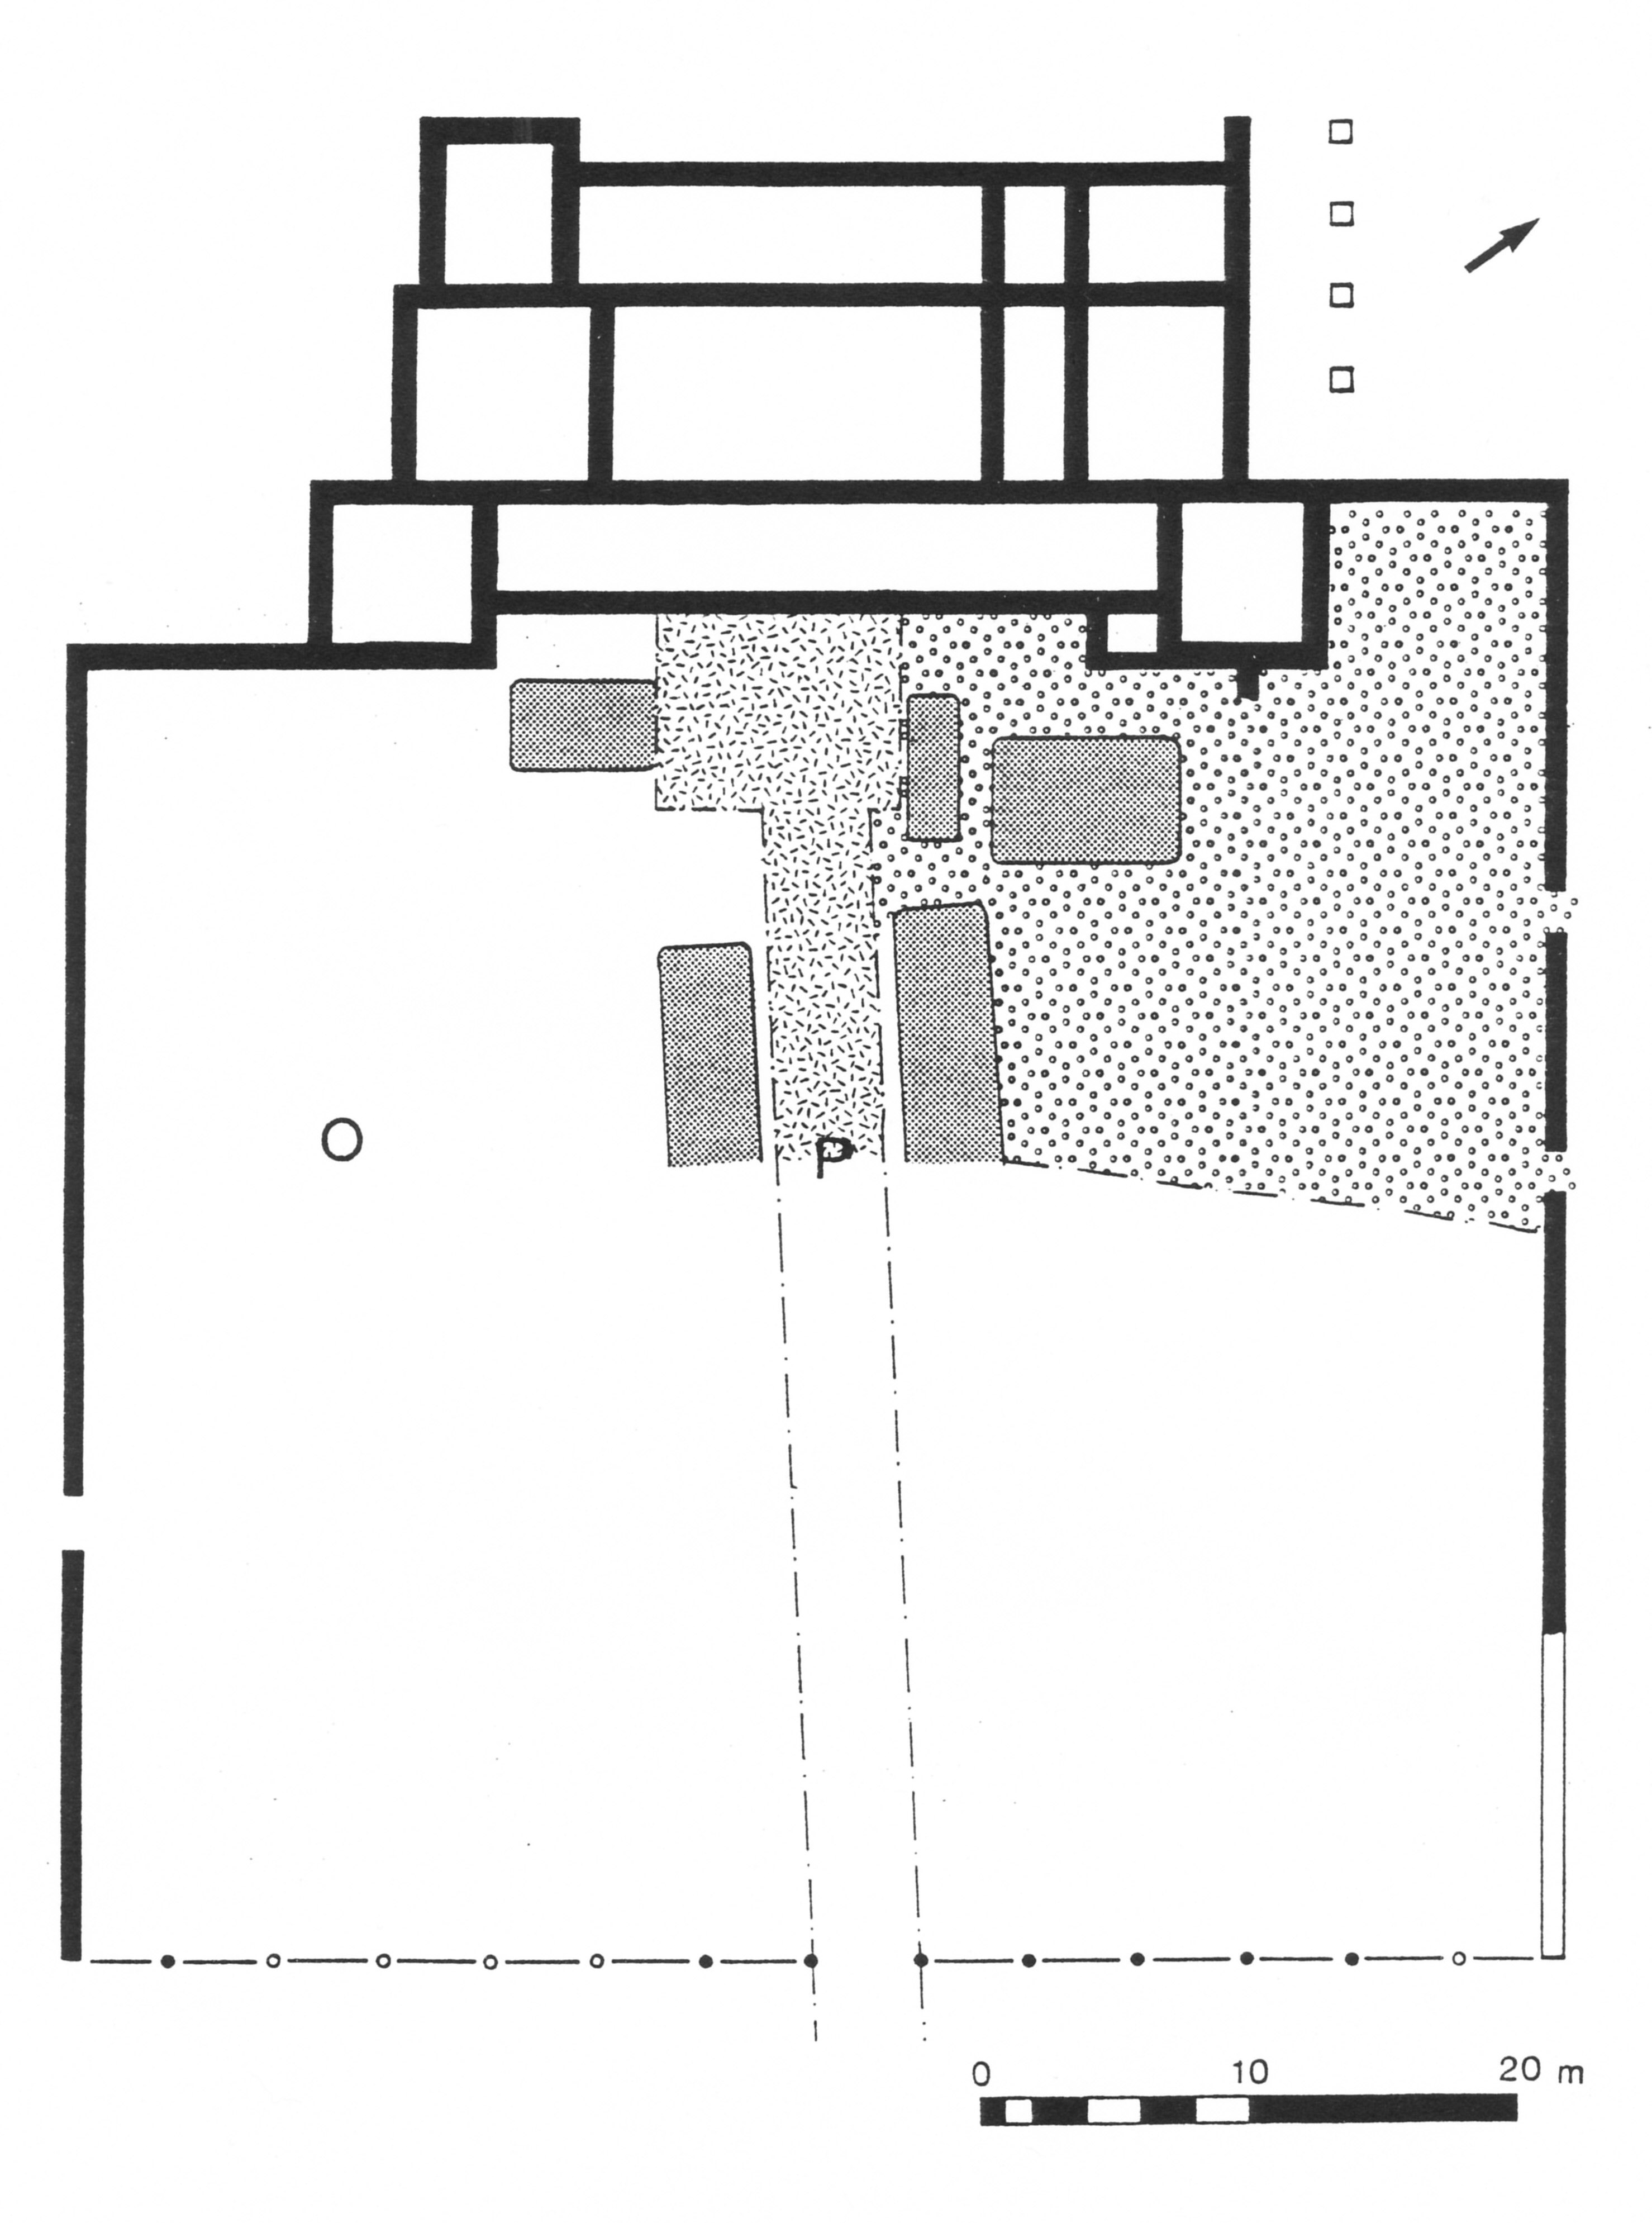 Fig. 1: Plan of the villa with its central path (P), planting beds for flowers and hedges (dark grey rectangles), a possible orchard (O) and a gravelled yard (dotted). Adapted from Zeepvat 1991, fig. 5.2.